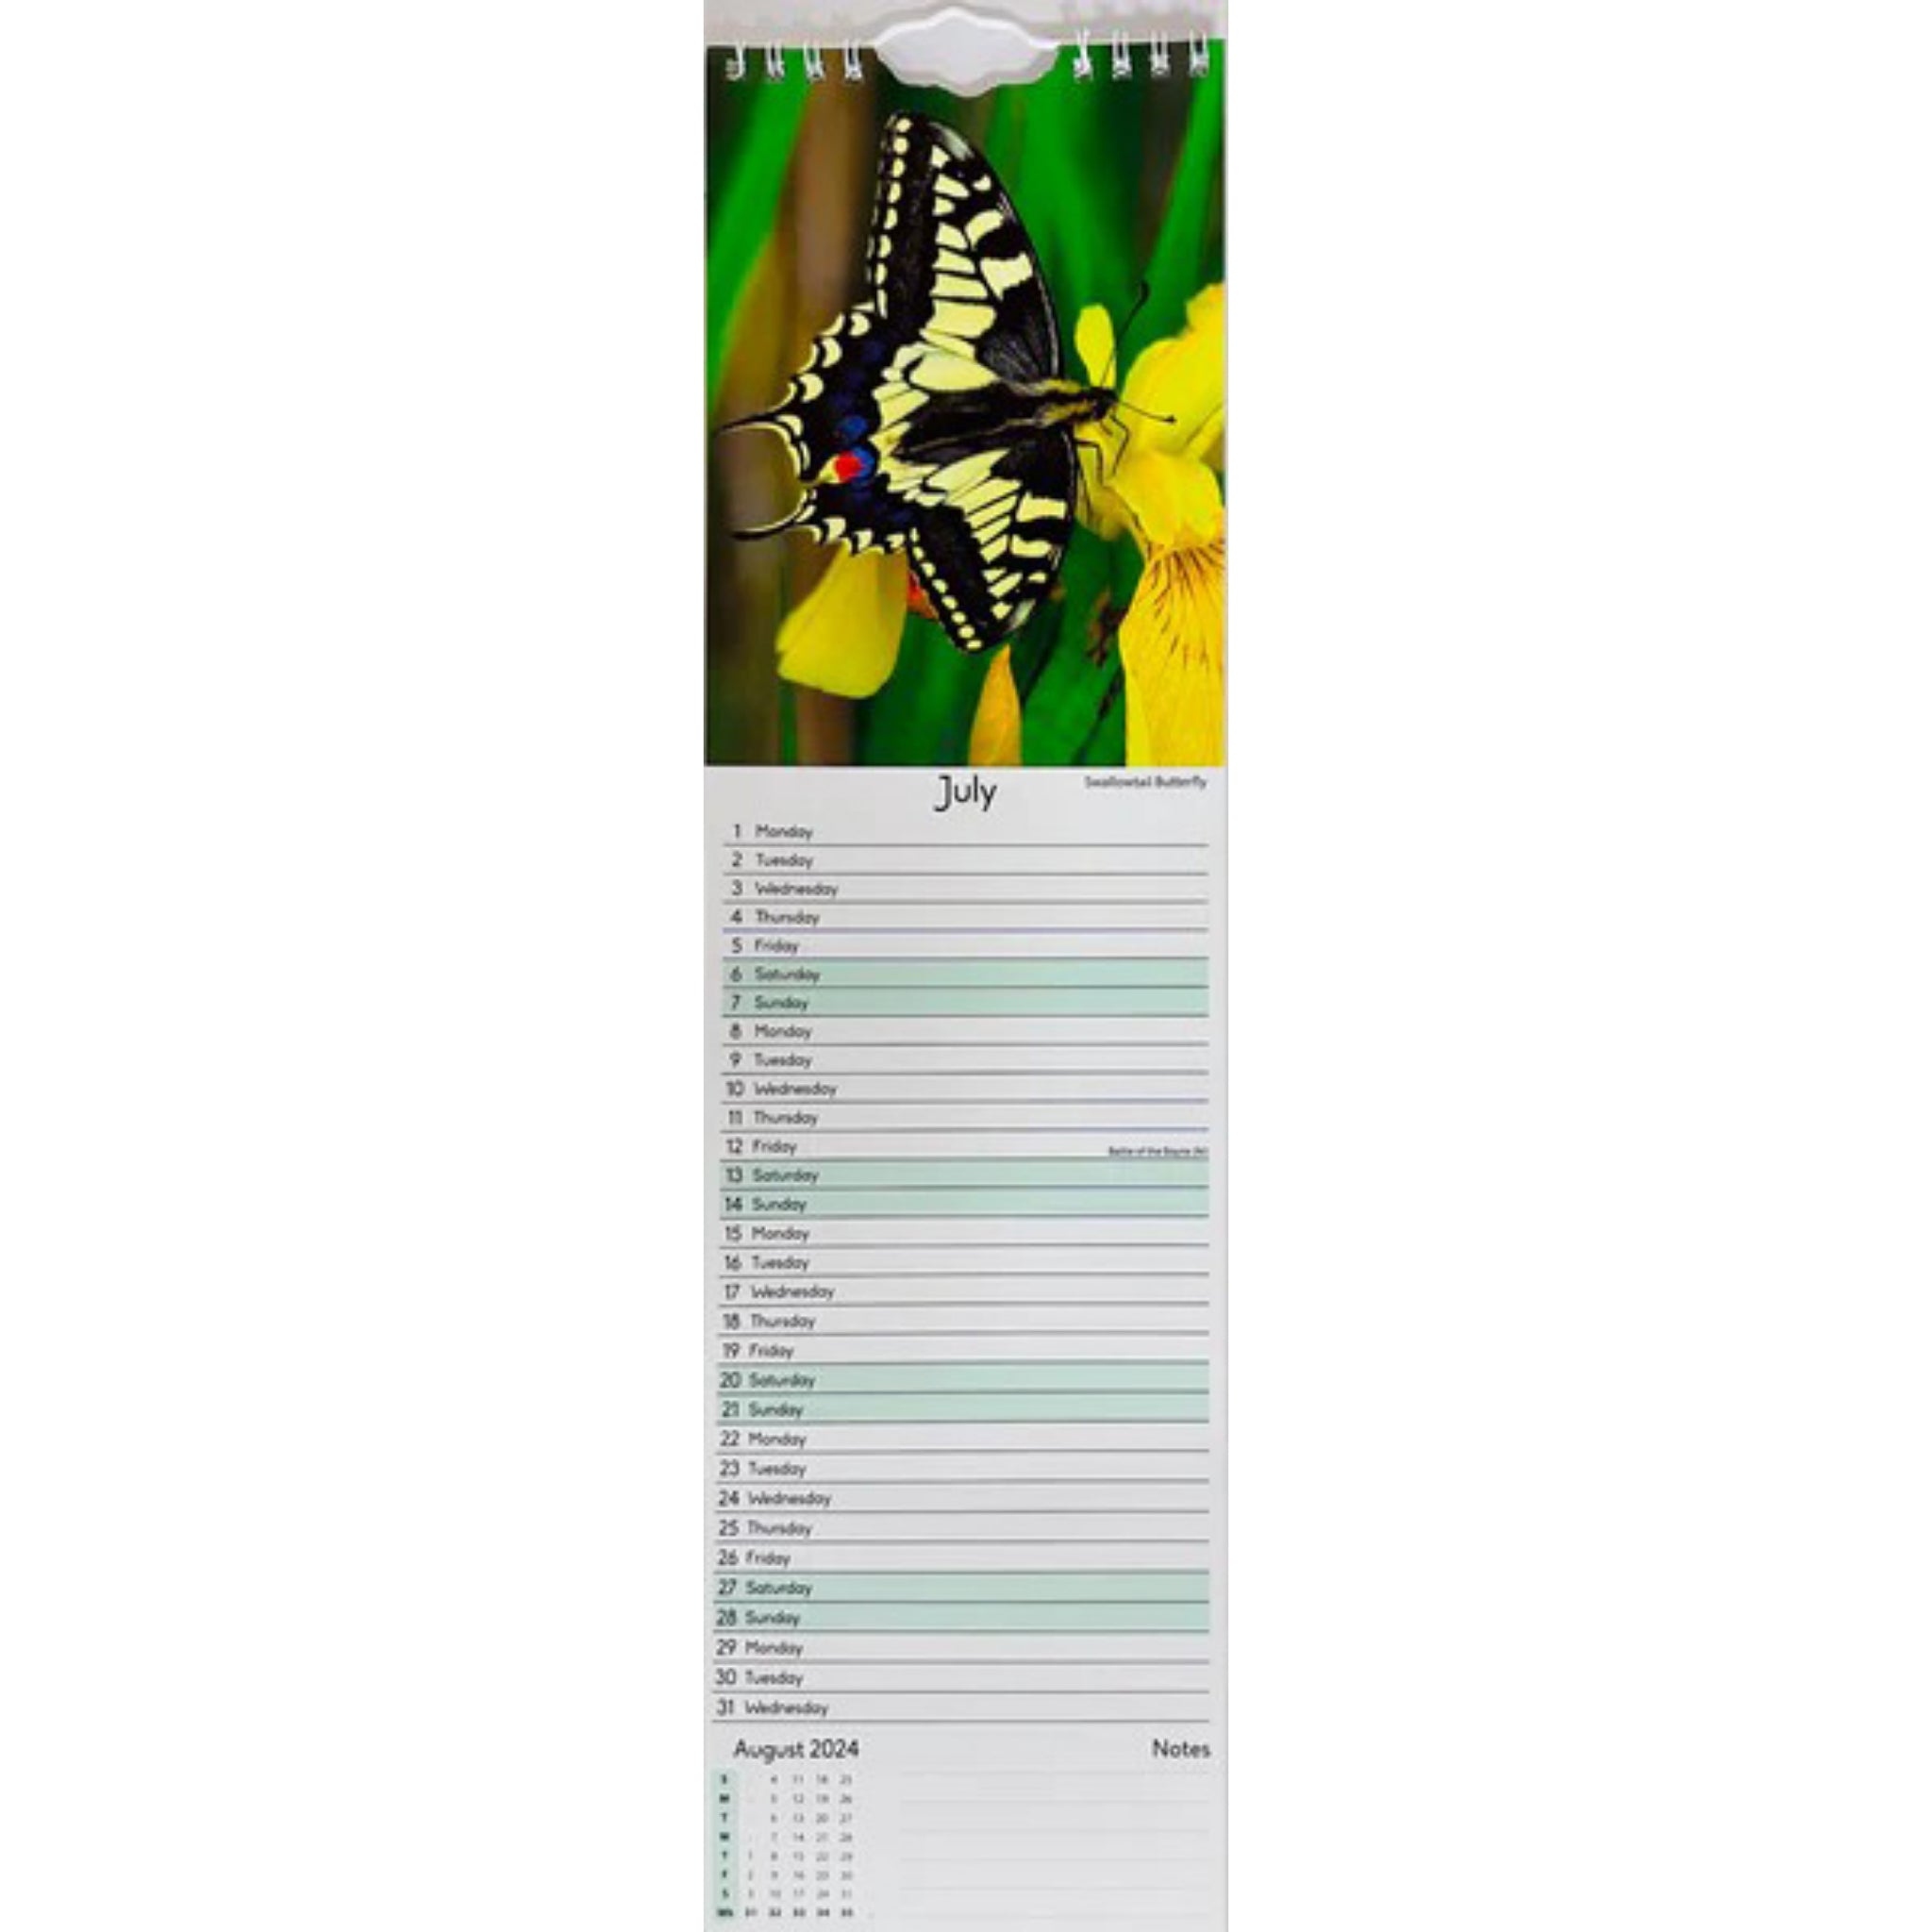 Beclen Harp 2024 Slim wall Calendar Month to View Home office School Calendar With Daily Notes & Pocket Diary/ Spiral Bound Hanging Wall Calendar Flower Garden Wildlife Scenes